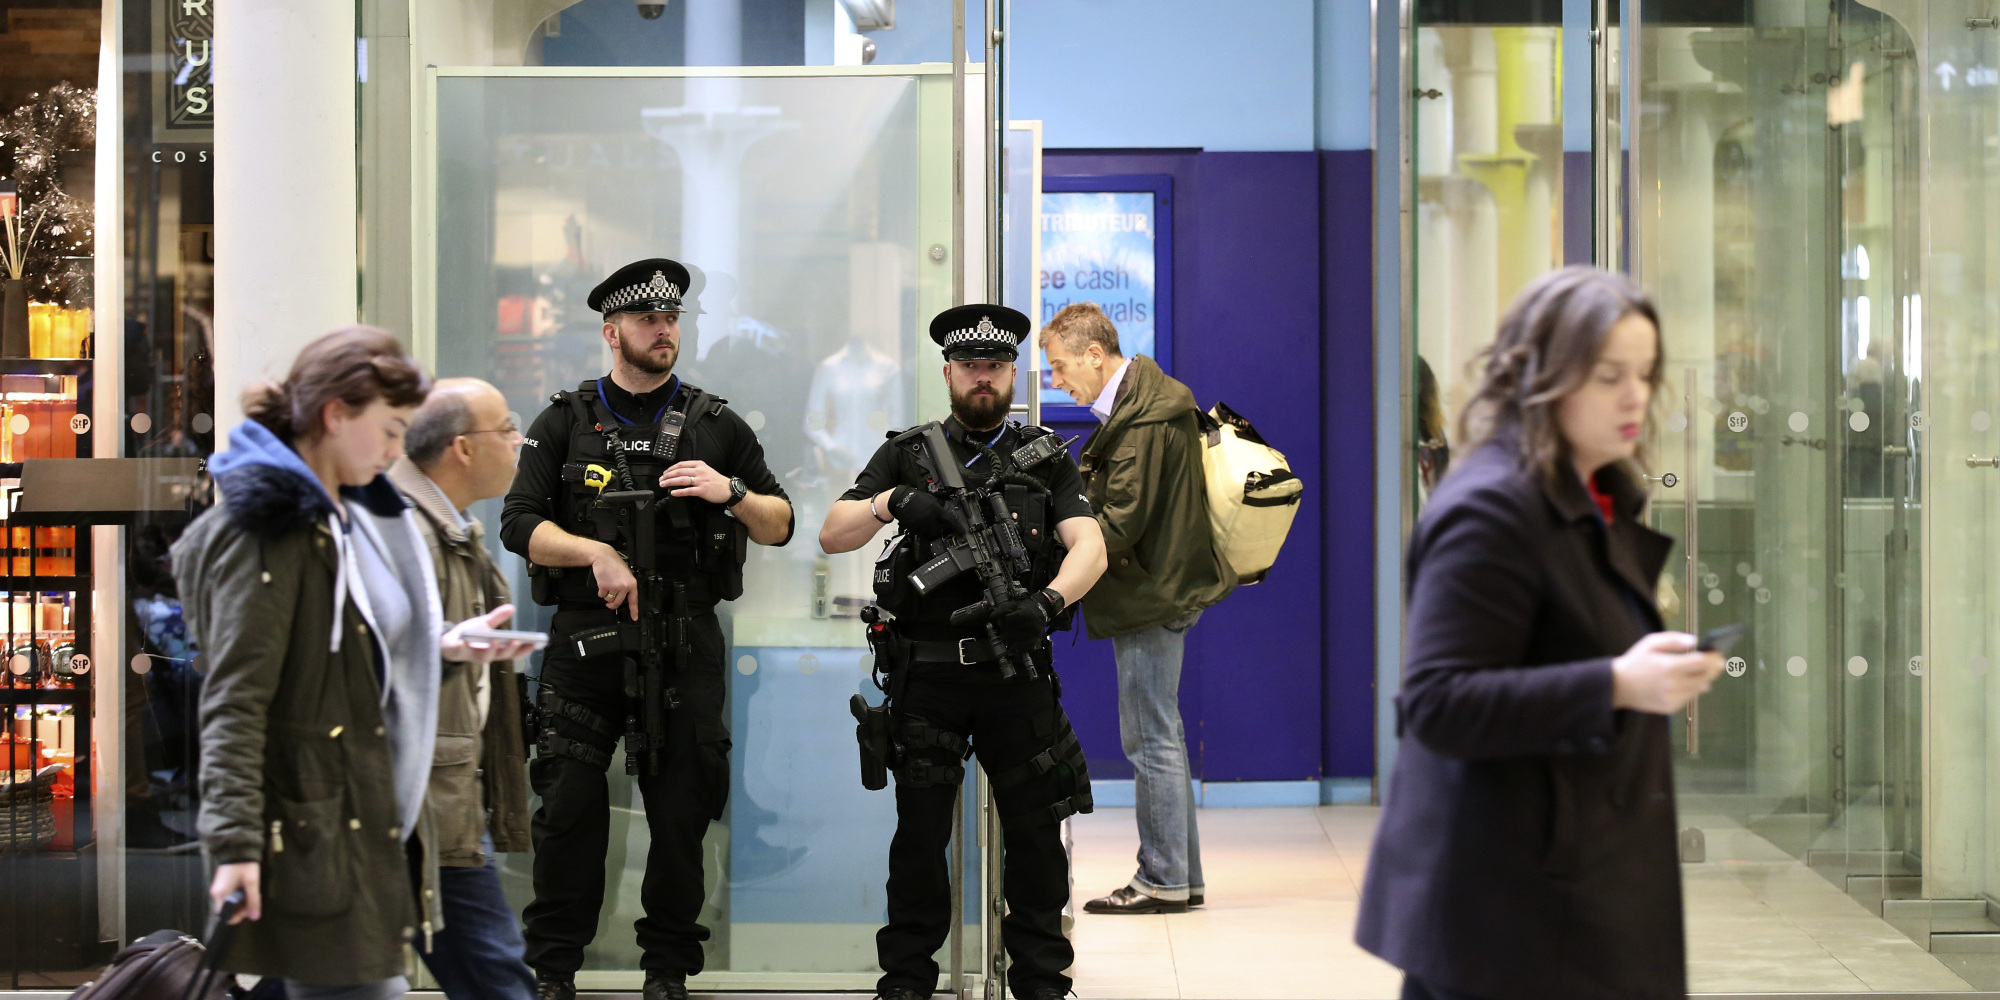 Armed police stand on duty at St Pancras International Station in London, Britain November 16, 2015. REUTERS/Paul Hackett